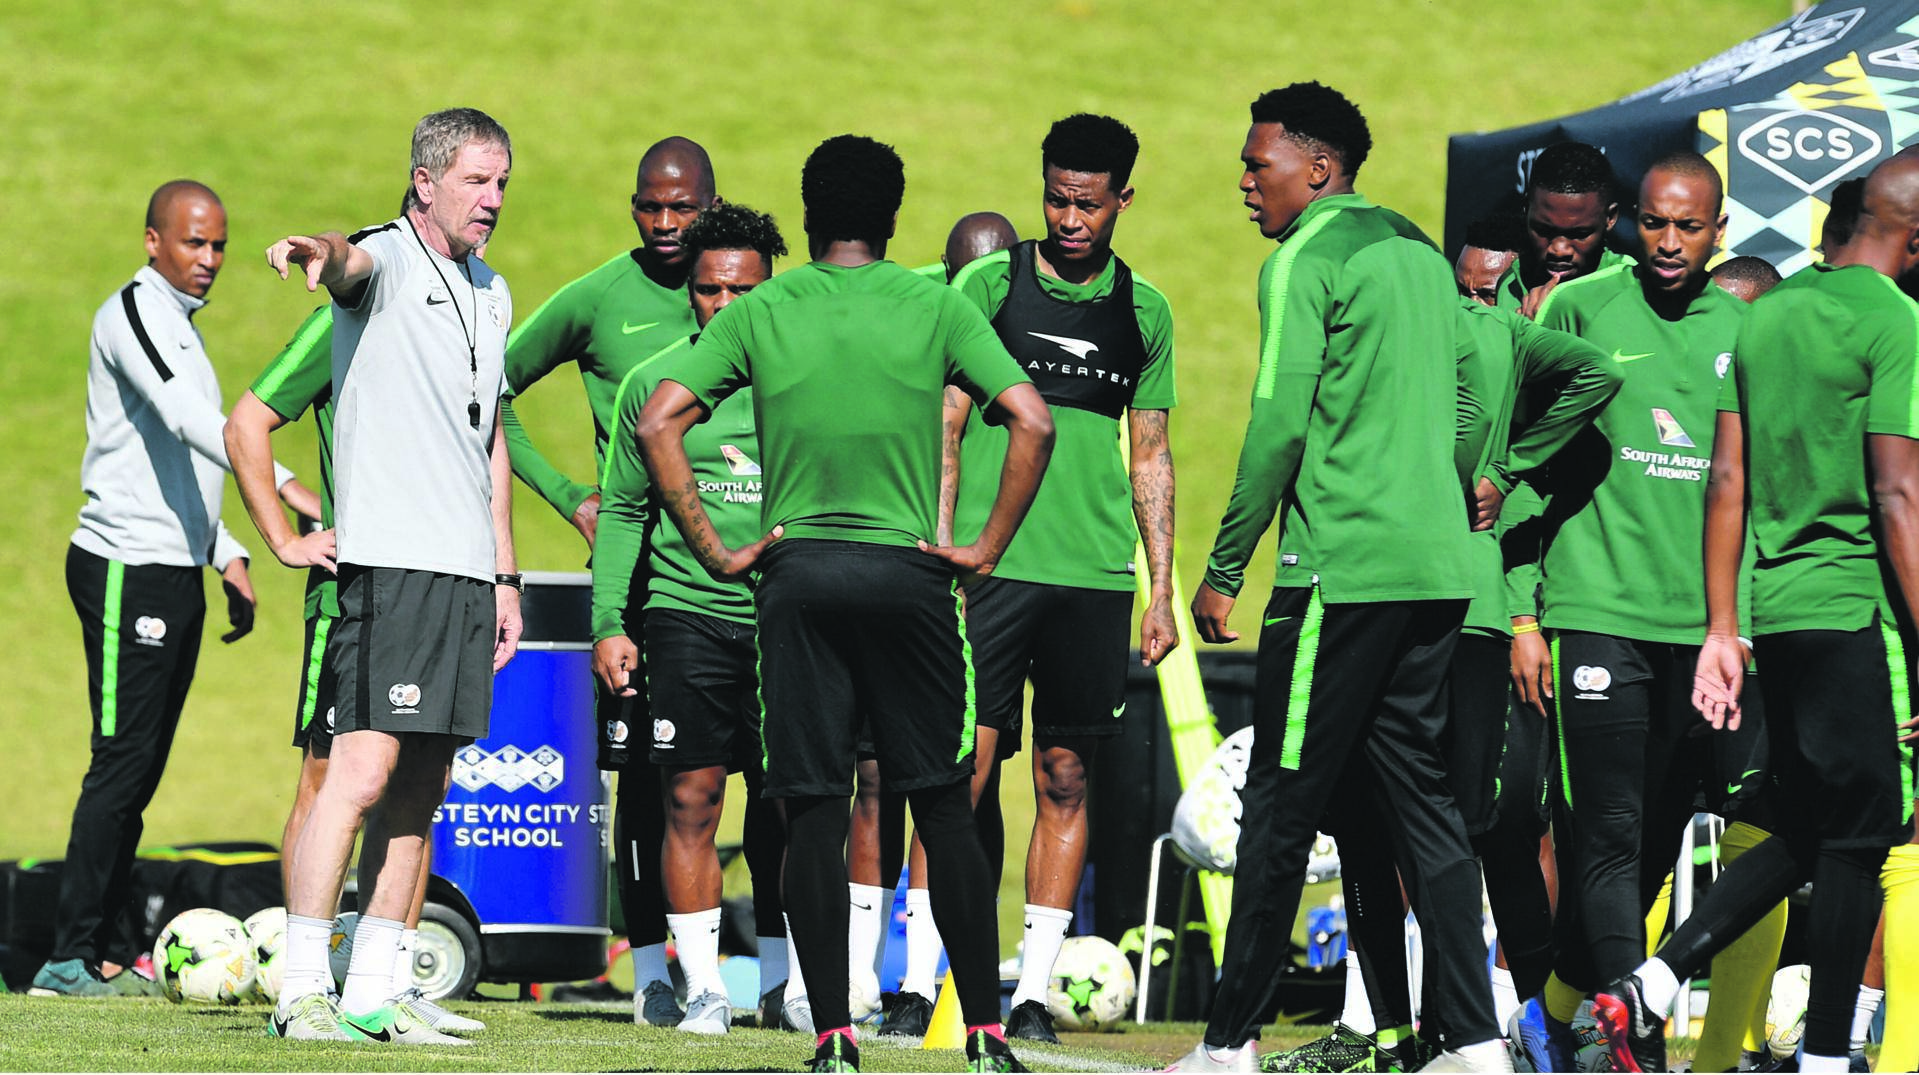 Bafana coach Stuart Baxter and the players during team training at Steyn City School in Fourways, Johannesburg. Picture: Lefty Shivambu / Gallo Images